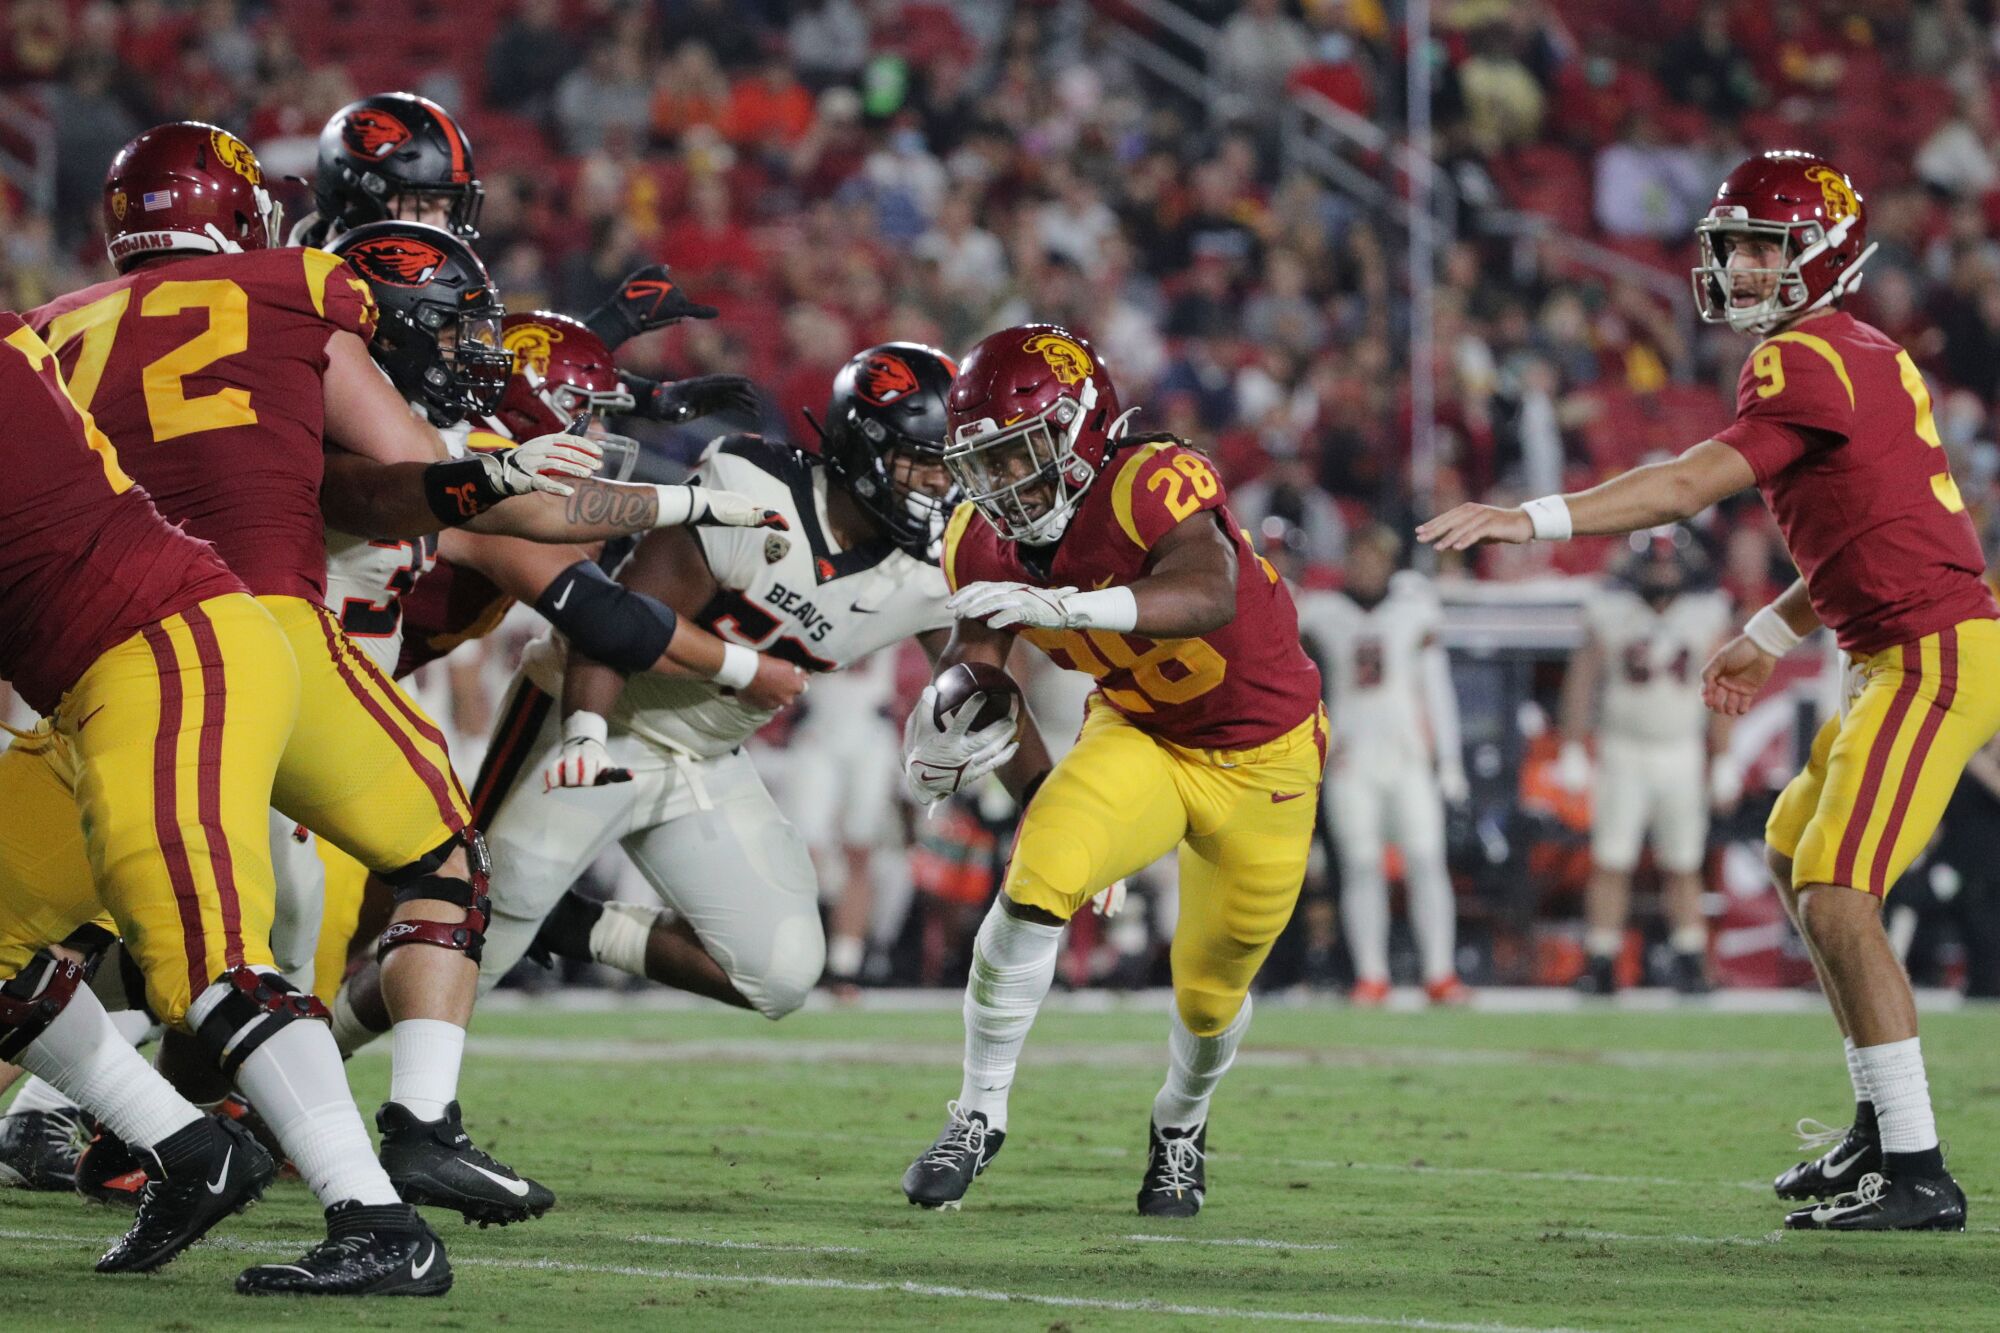 USC running back Keaontay Ingram eludes the Oregon State defense to score a first-half touchdown.